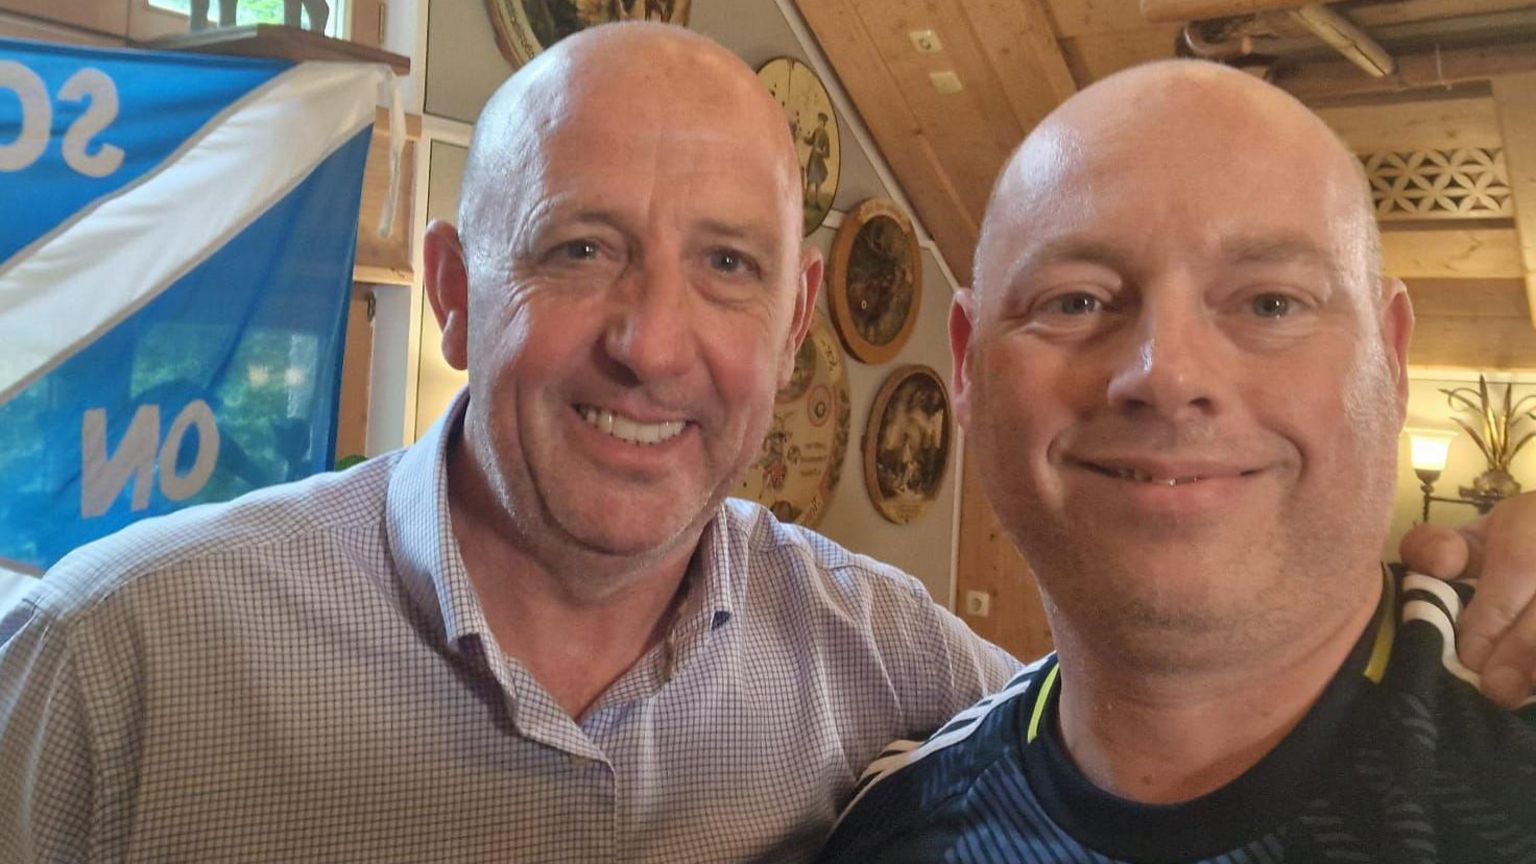 (L-R) Gary McAllister and Ross Hamilton in a selfie